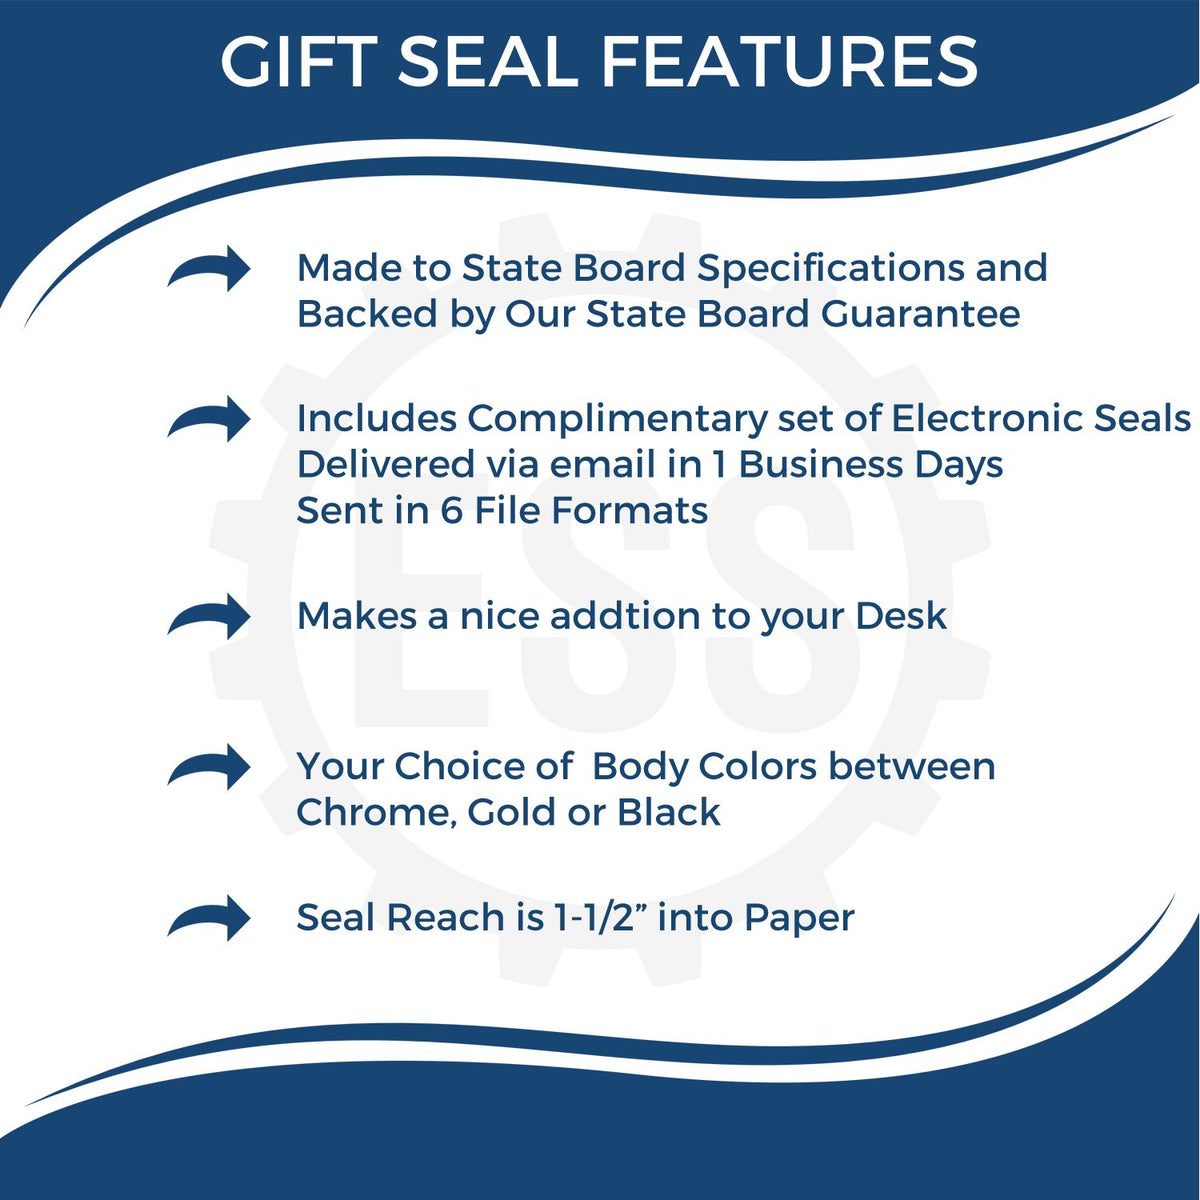 A picture of an infographic highlighting the selling points for the Gift Maryland Geologist Seal